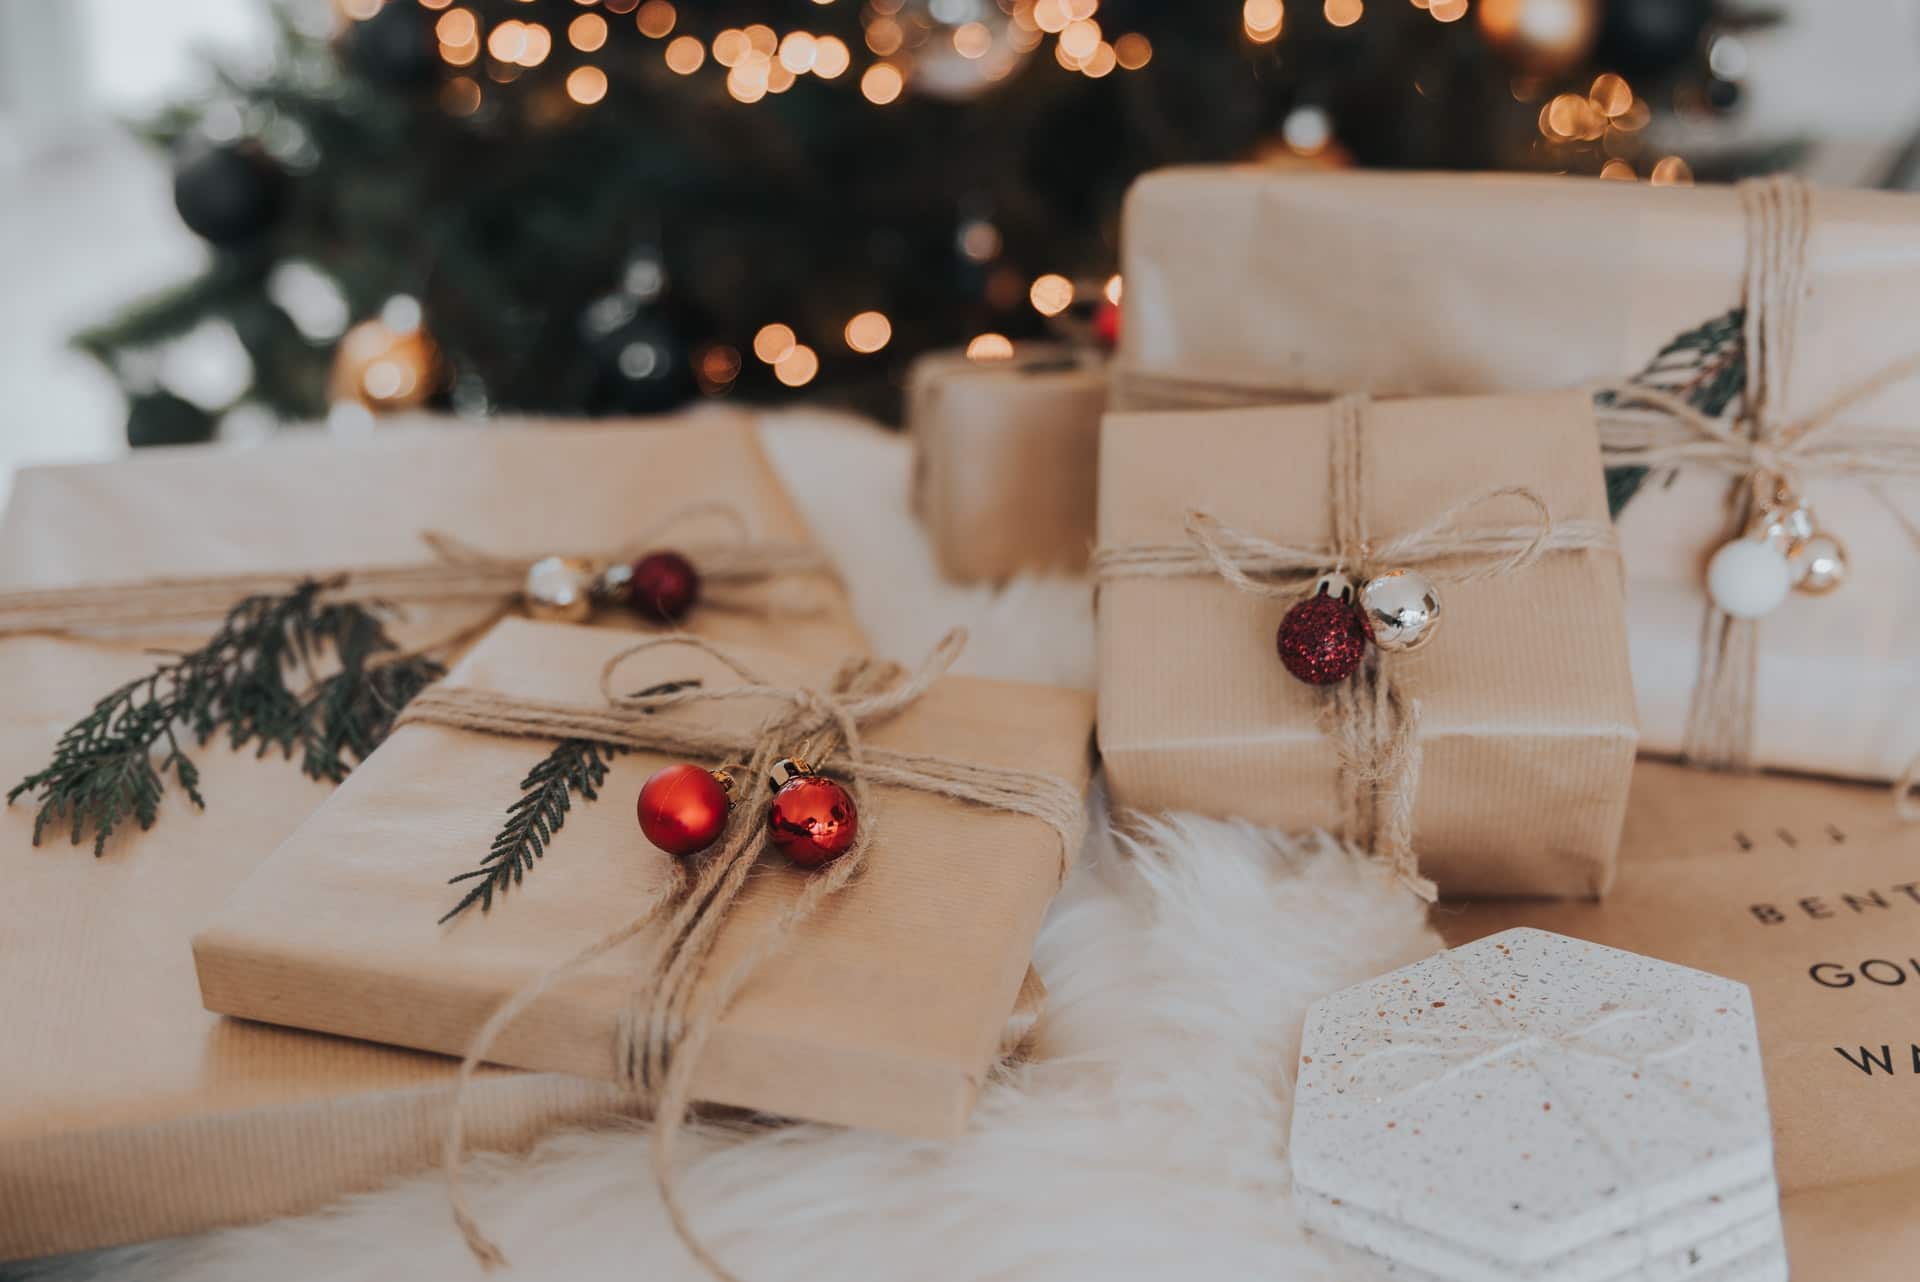 lore schodts bNPIoil02tU unsplash - 4 Tips For Meaningful Christmas Gift Giving